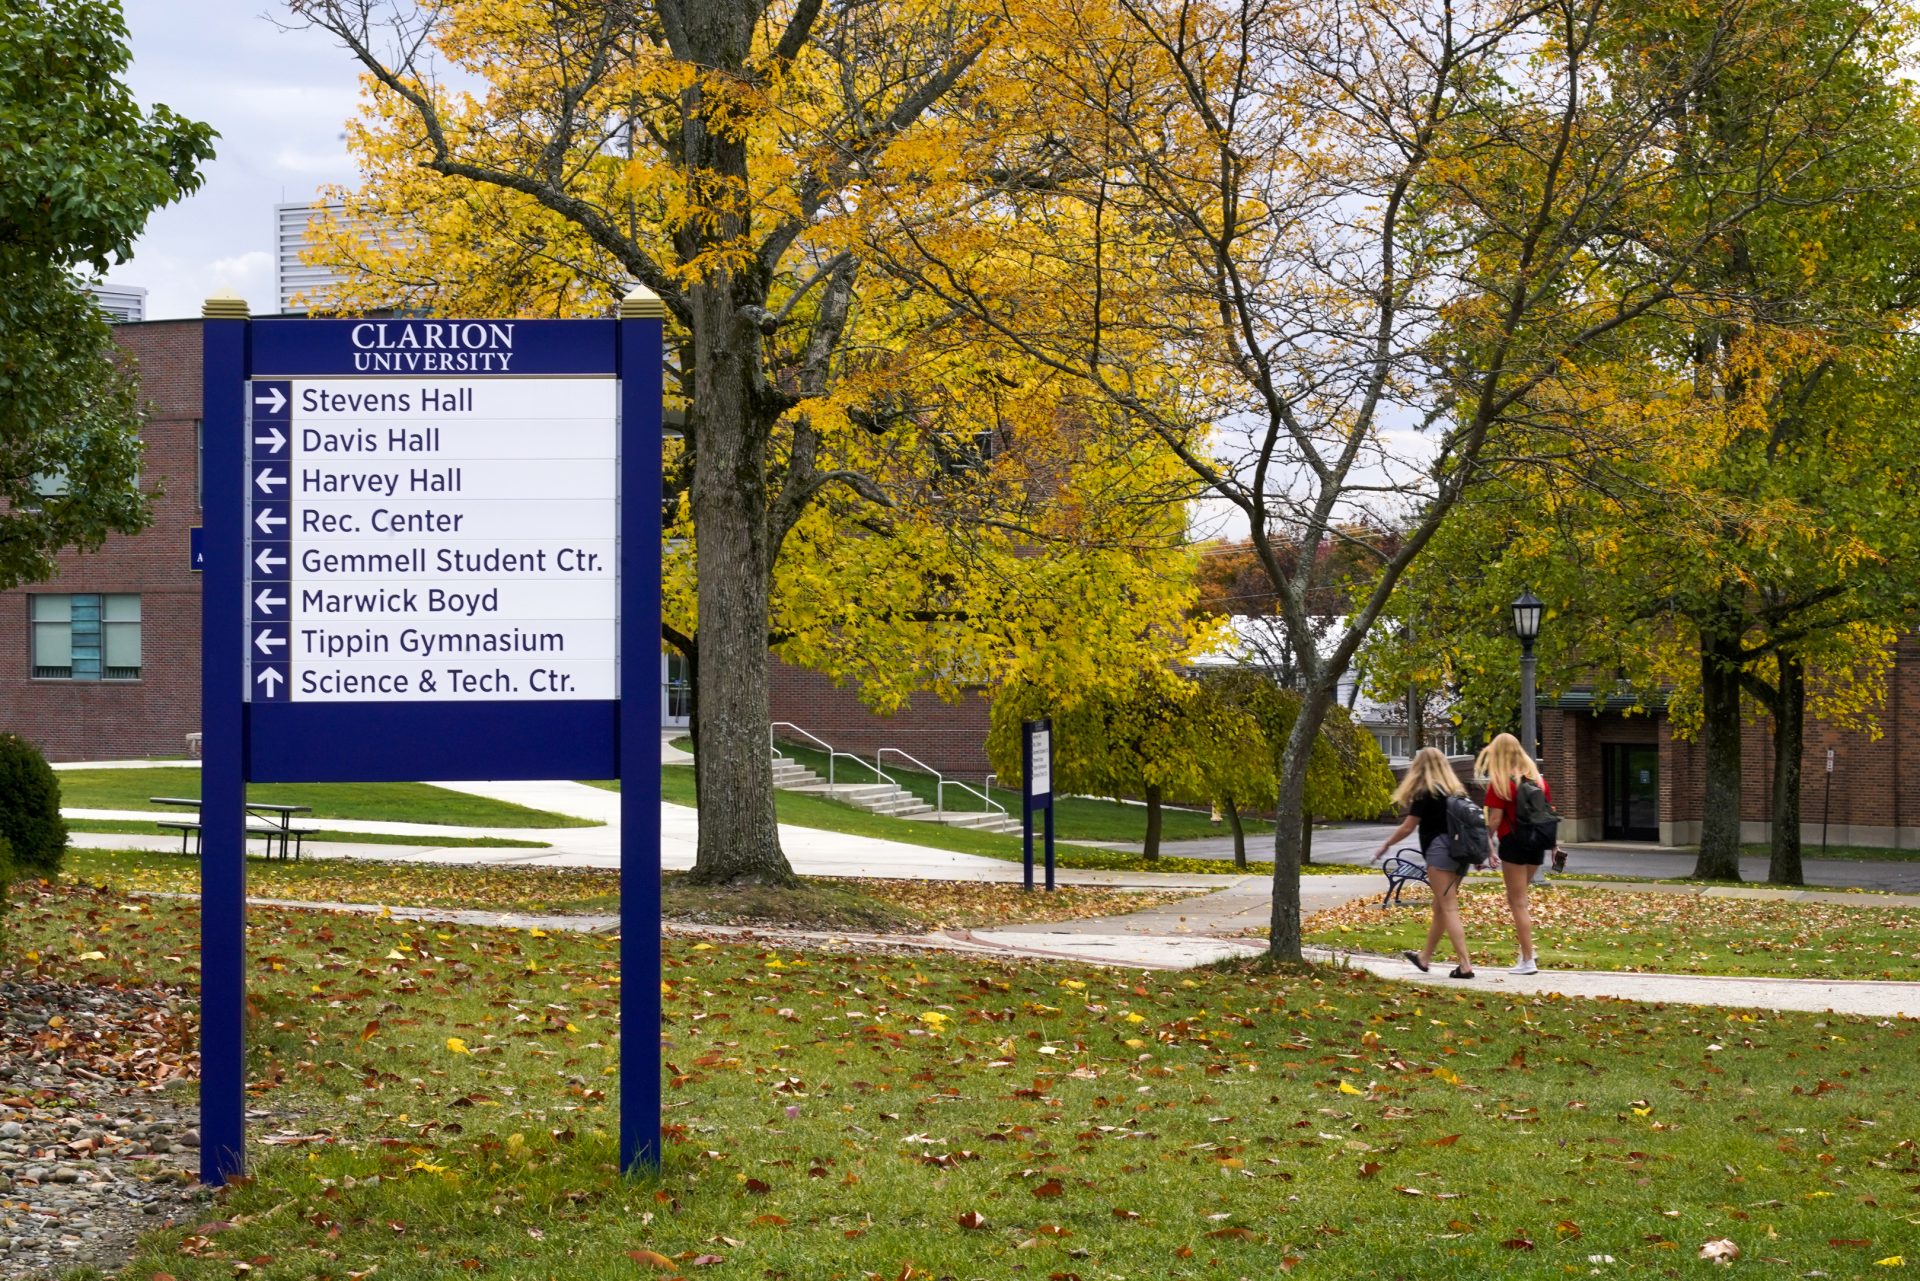 Students walk through the campus of Clarion University in Clarion, Pa, on Wednesday, Oct. 21, 2020.